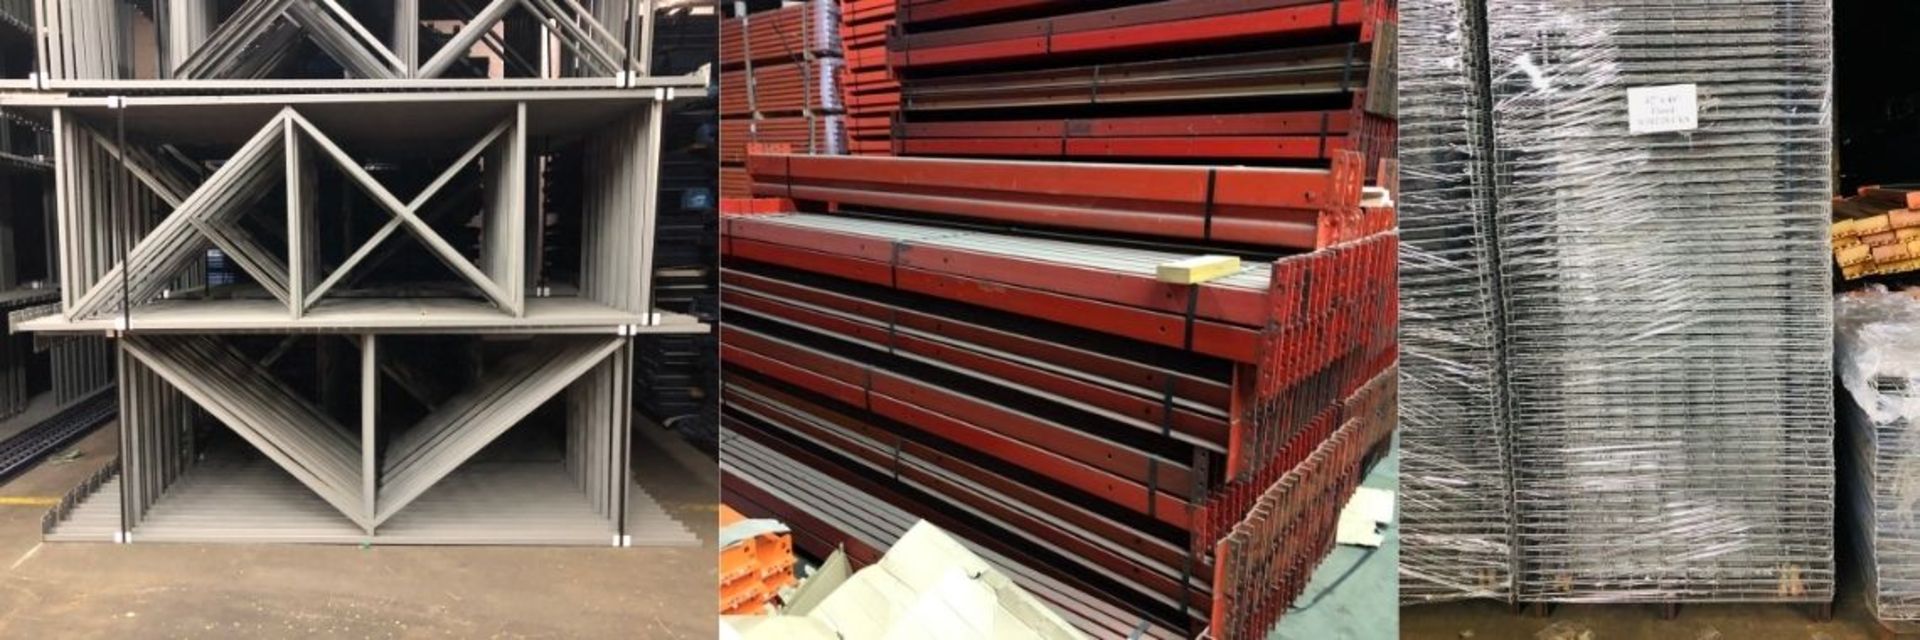 14 BAYS OF 10.5'H X 42"D X 102"L STRUCTURAL STYLE PALLET RACKS - Image 2 of 4